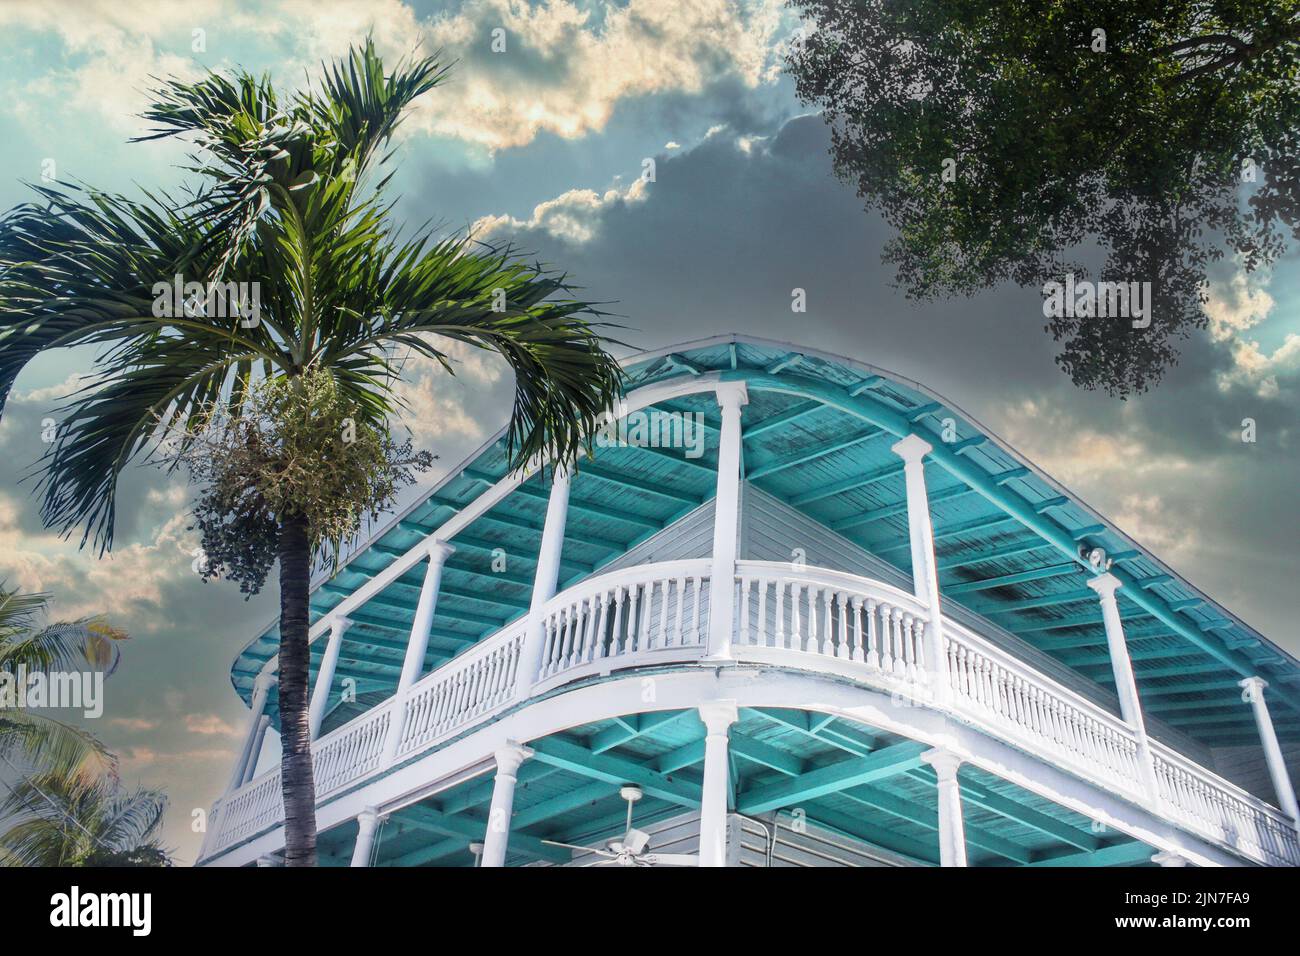 Tropical turquoise building with balcony around it against stormy sky with palm tree - looking up at an angle - perspective Stock Photo